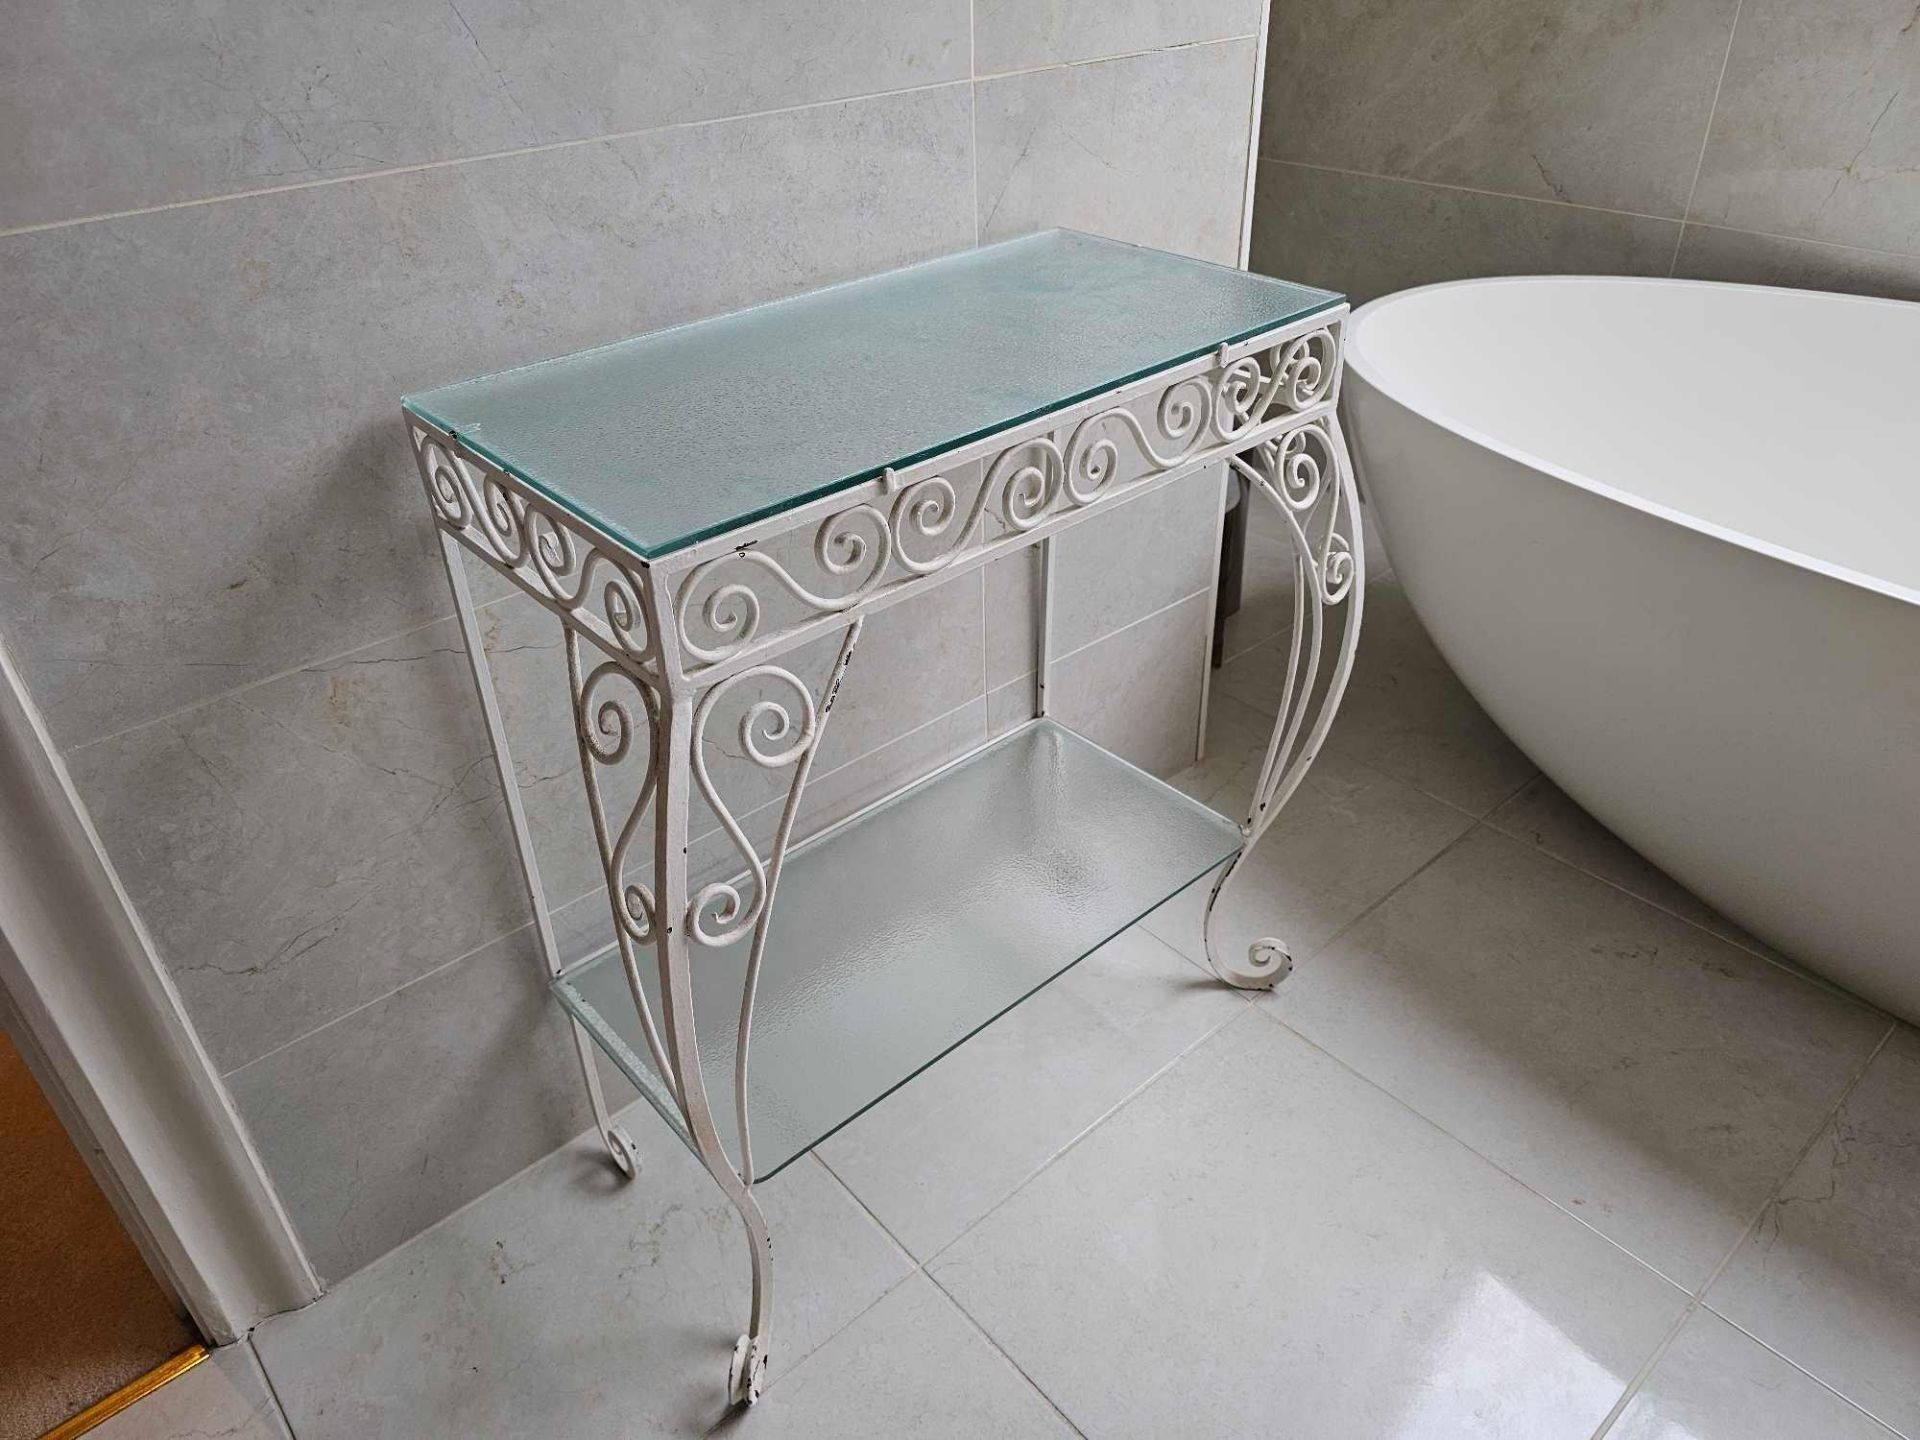 A Cast Metal Scroll Work Painted Console Table With Opaque Glass Top And Undertier 60 X 30 X 74cm - Image 2 of 3